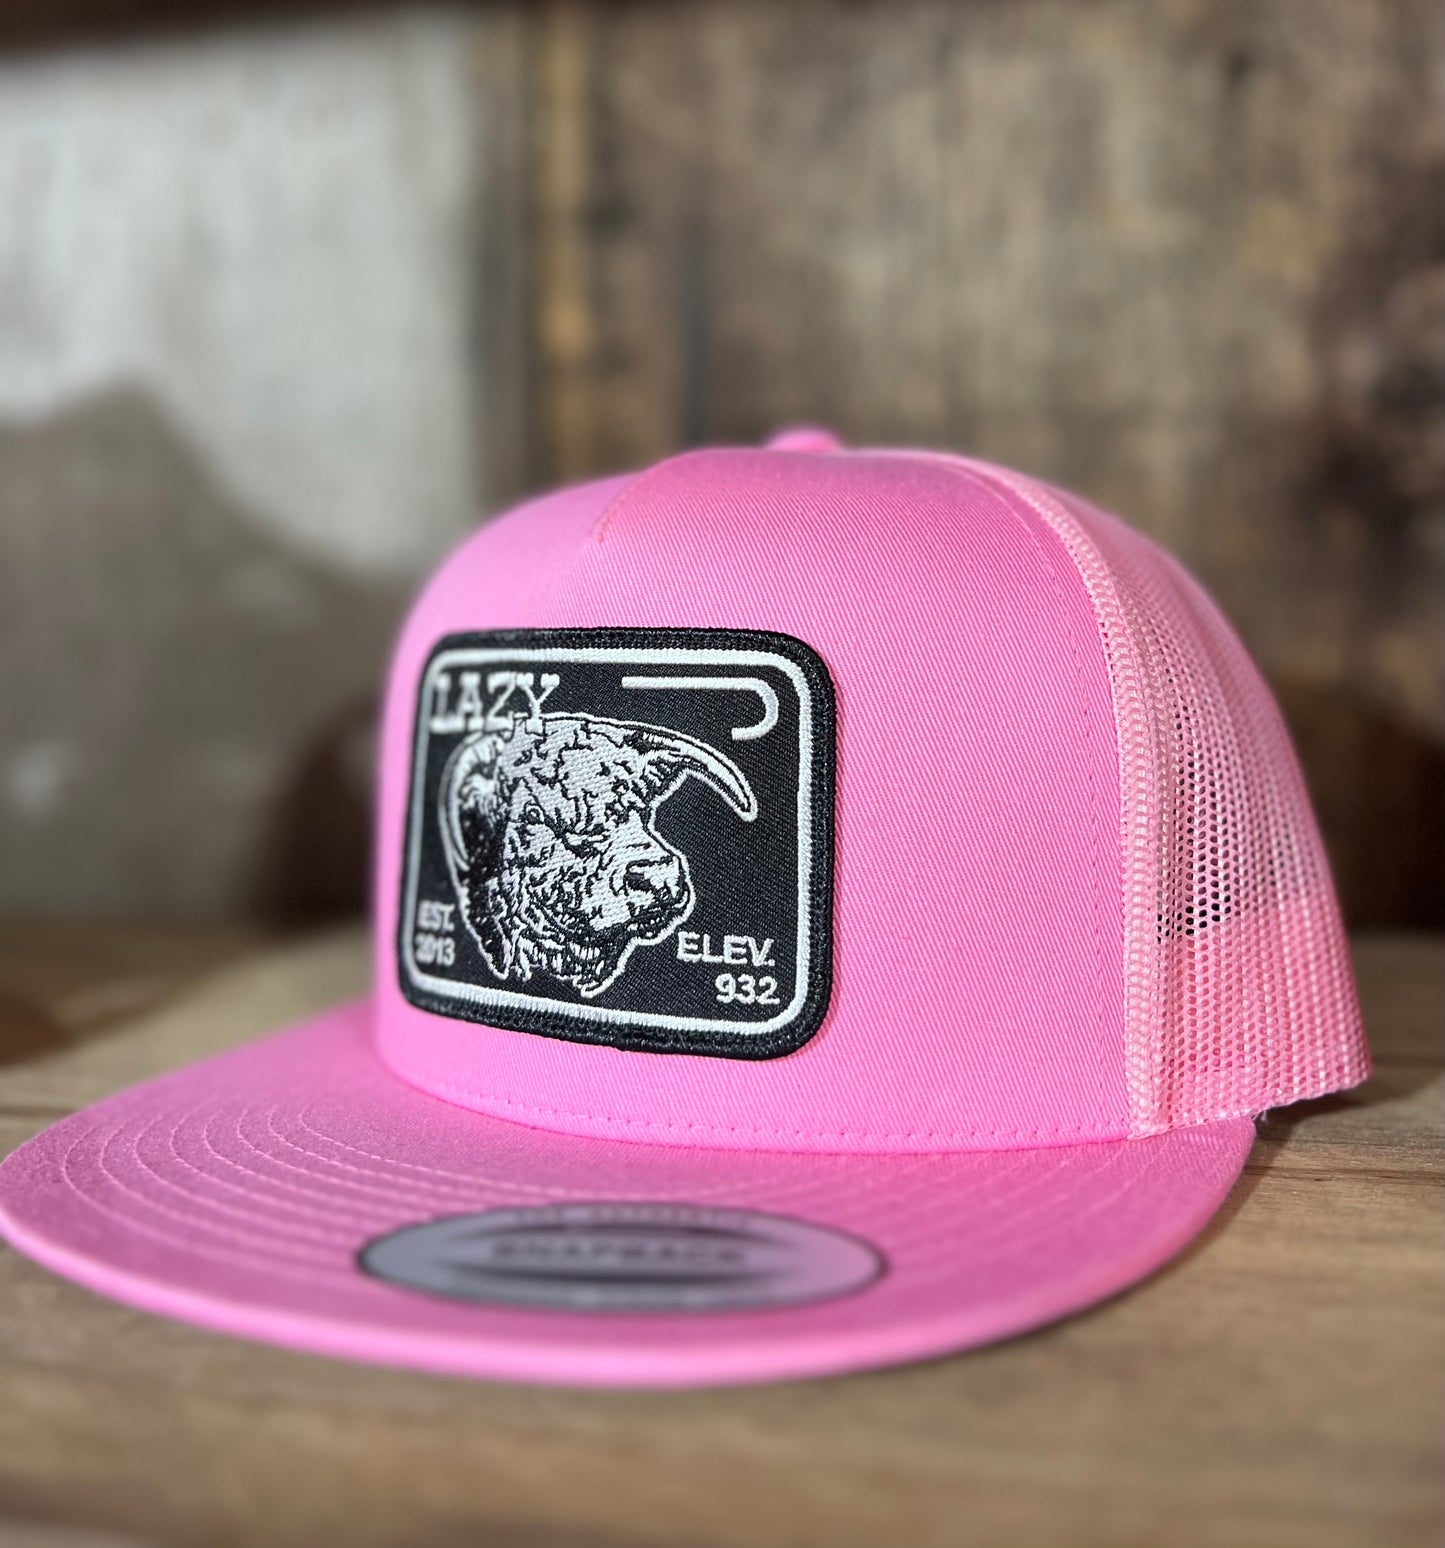 Lazy J Pink Hat with Black Hereford Patch